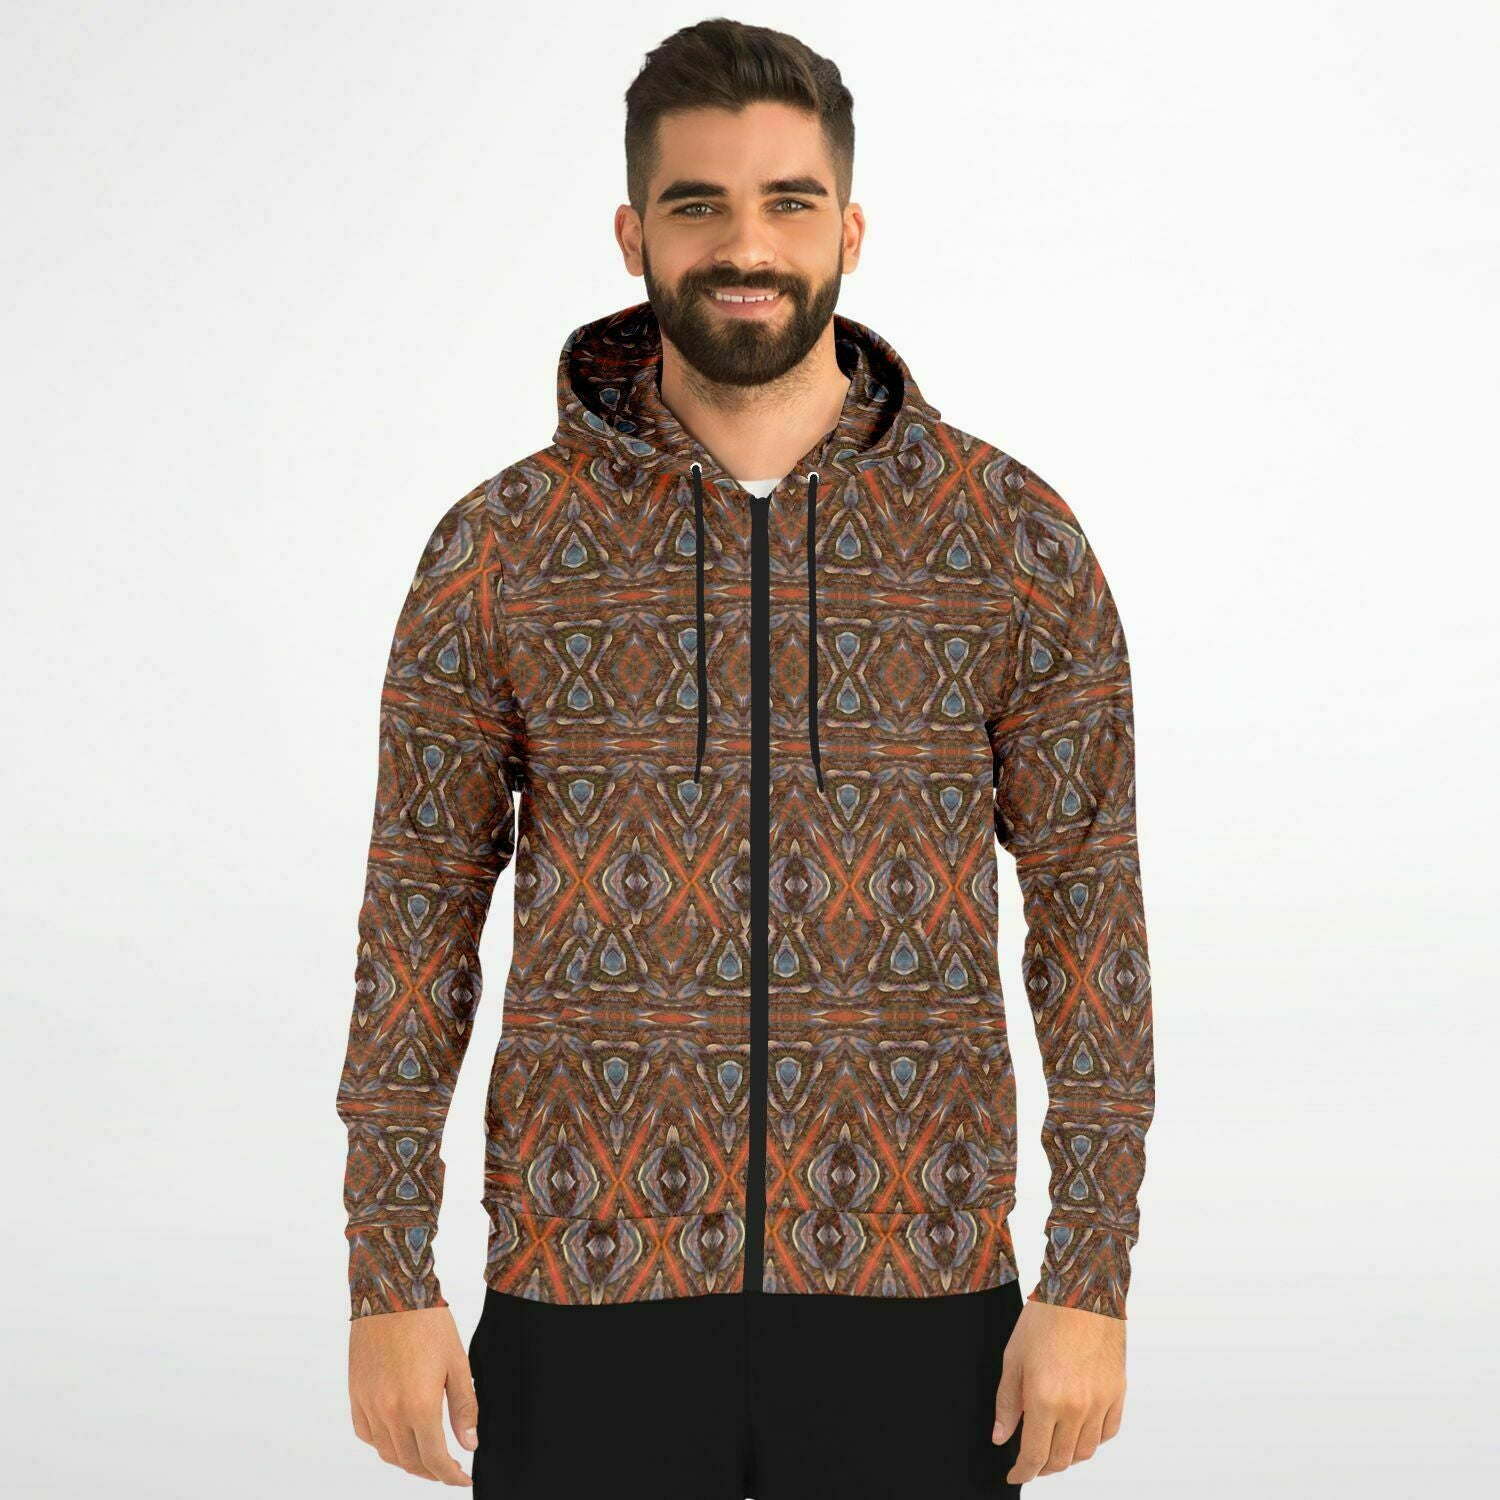 Brown and orange hoodie for men with a unique design and a full zip front closure